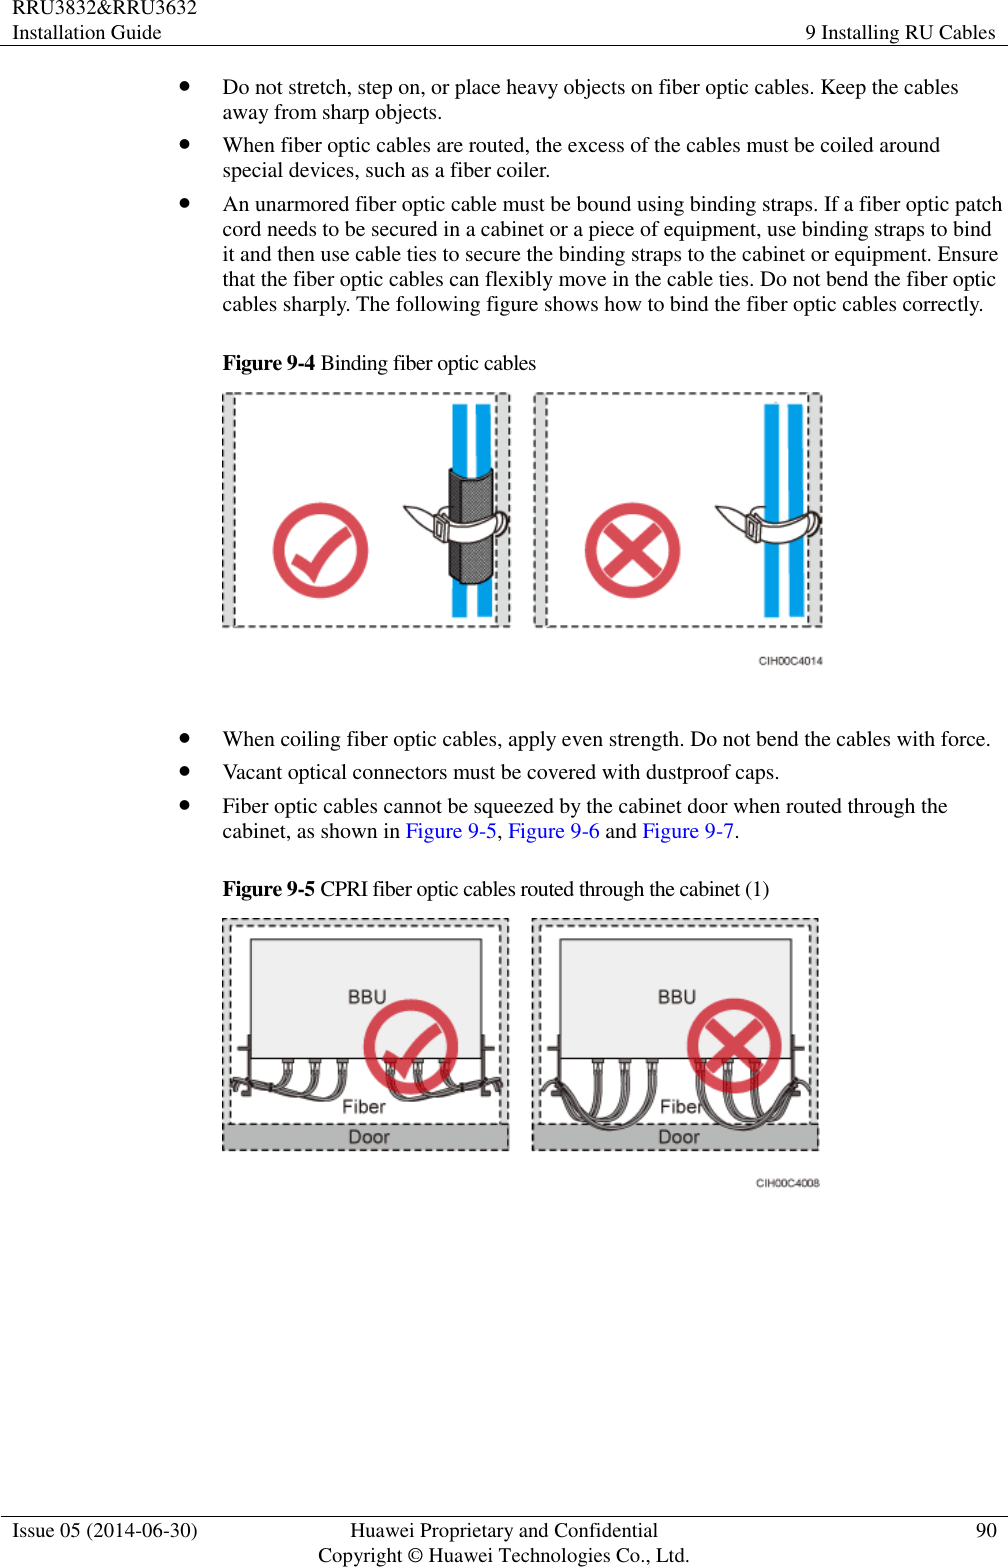 RRU3832&amp;RRU3632 Installation Guide 9 Installing RU Cables  Issue 05 (2014-06-30) Huawei Proprietary and Confidential                                     Copyright © Huawei Technologies Co., Ltd. 90   Do not stretch, step on, or place heavy objects on fiber optic cables. Keep the cables away from sharp objects.  When fiber optic cables are routed, the excess of the cables must be coiled around special devices, such as a fiber coiler.  An unarmored fiber optic cable must be bound using binding straps. If a fiber optic patch cord needs to be secured in a cabinet or a piece of equipment, use binding straps to bind it and then use cable ties to secure the binding straps to the cabinet or equipment. Ensure that the fiber optic cables can flexibly move in the cable ties. Do not bend the fiber optic cables sharply. The following figure shows how to bind the fiber optic cables correctly. Figure 9-4 Binding fiber optic cables    When coiling fiber optic cables, apply even strength. Do not bend the cables with force.  Vacant optical connectors must be covered with dustproof caps.  Fiber optic cables cannot be squeezed by the cabinet door when routed through the cabinet, as shown in Figure 9-5, Figure 9-6 and Figure 9-7. Figure 9-5 CPRI fiber optic cables routed through the cabinet (1)   